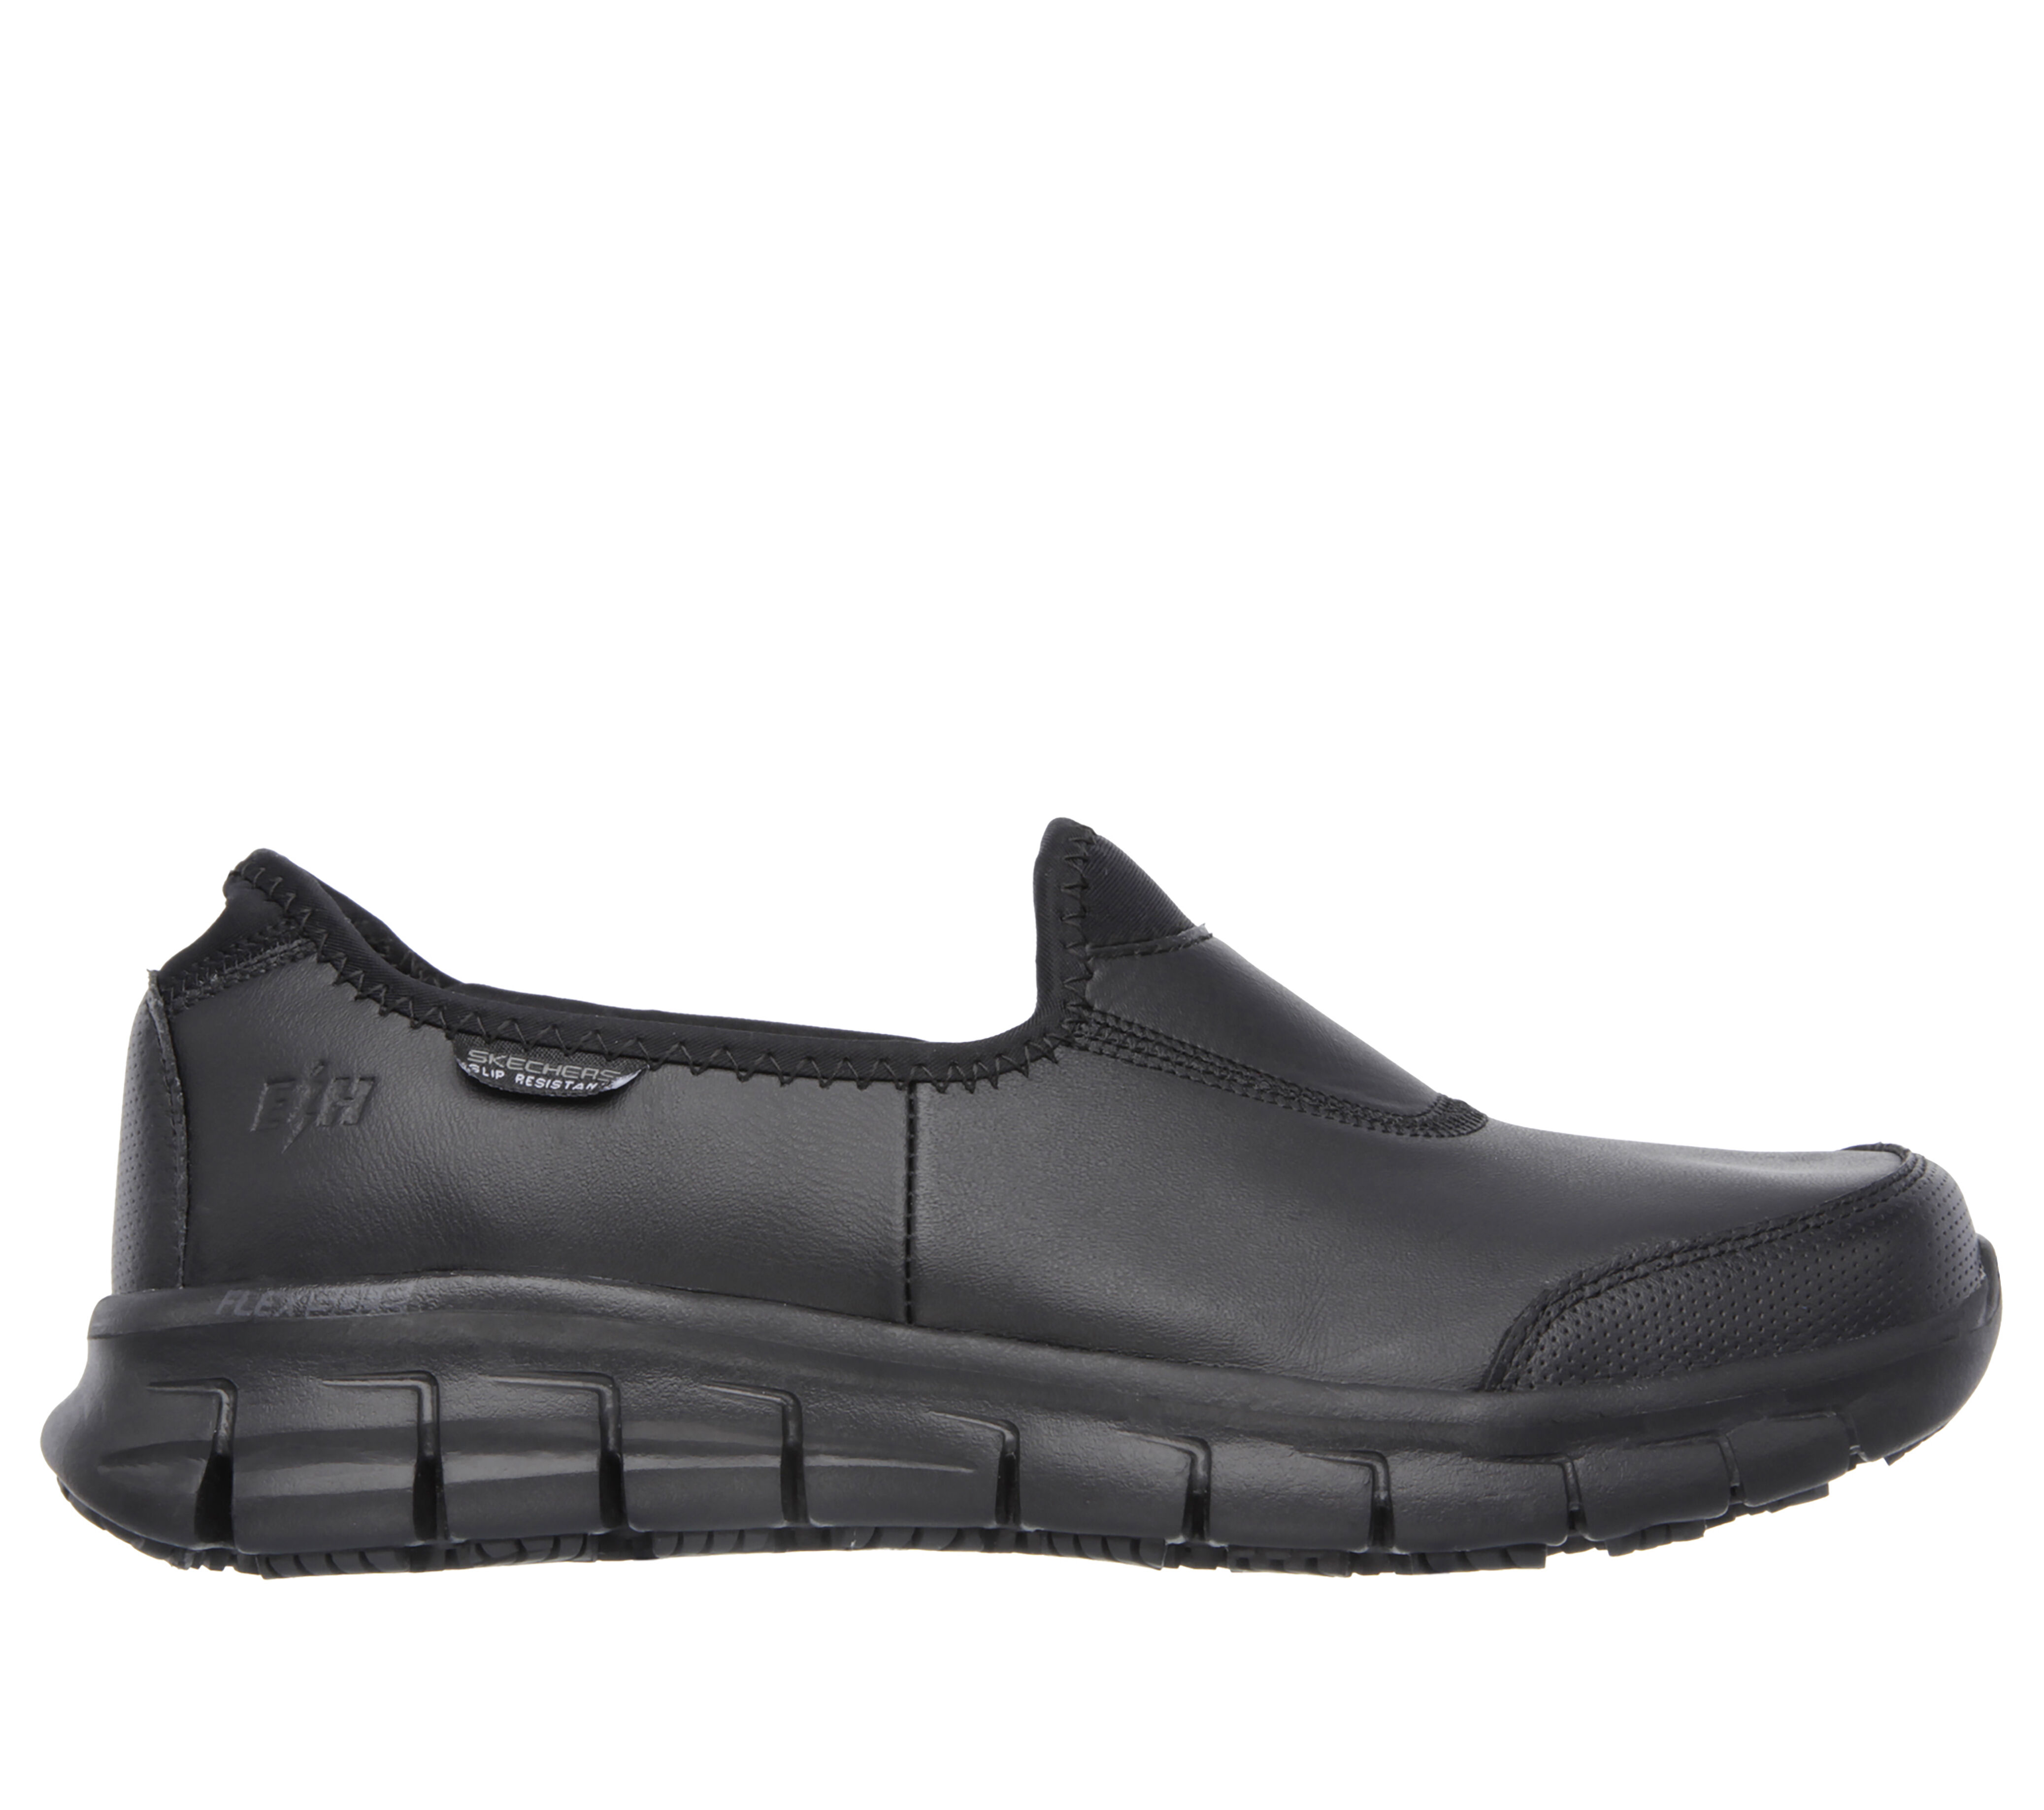 Work: Relaxed Fit - Sure Track | SKECHERS